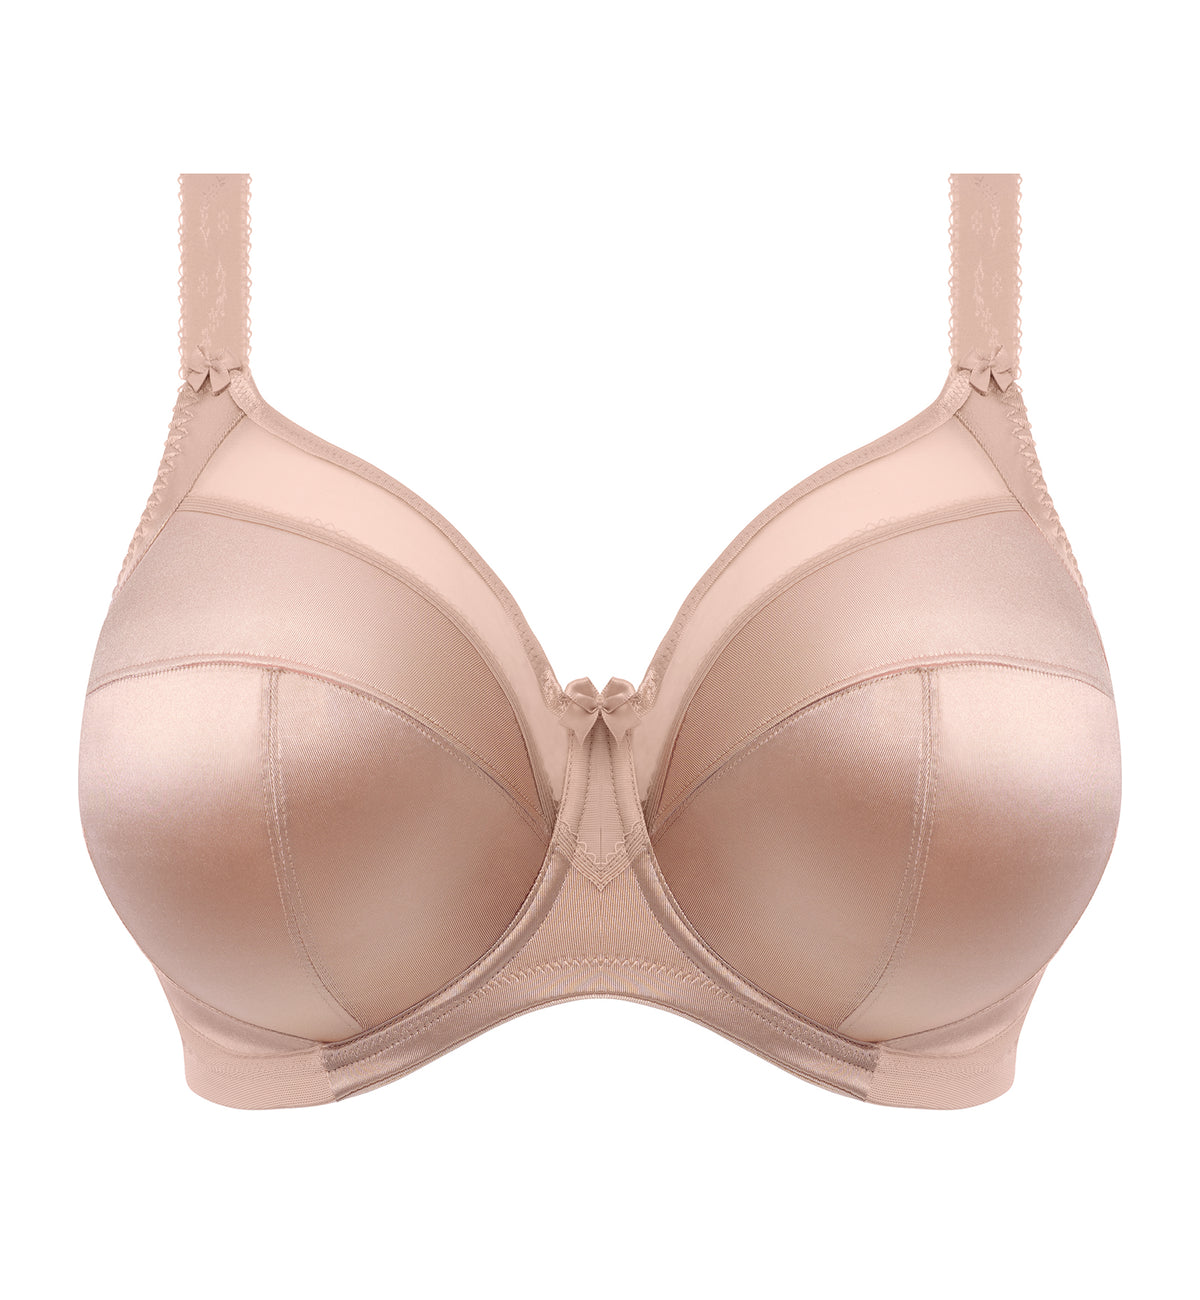 Goddess Keira Support Underwire Bra (6090),34I,Fawn - Fawn,34I